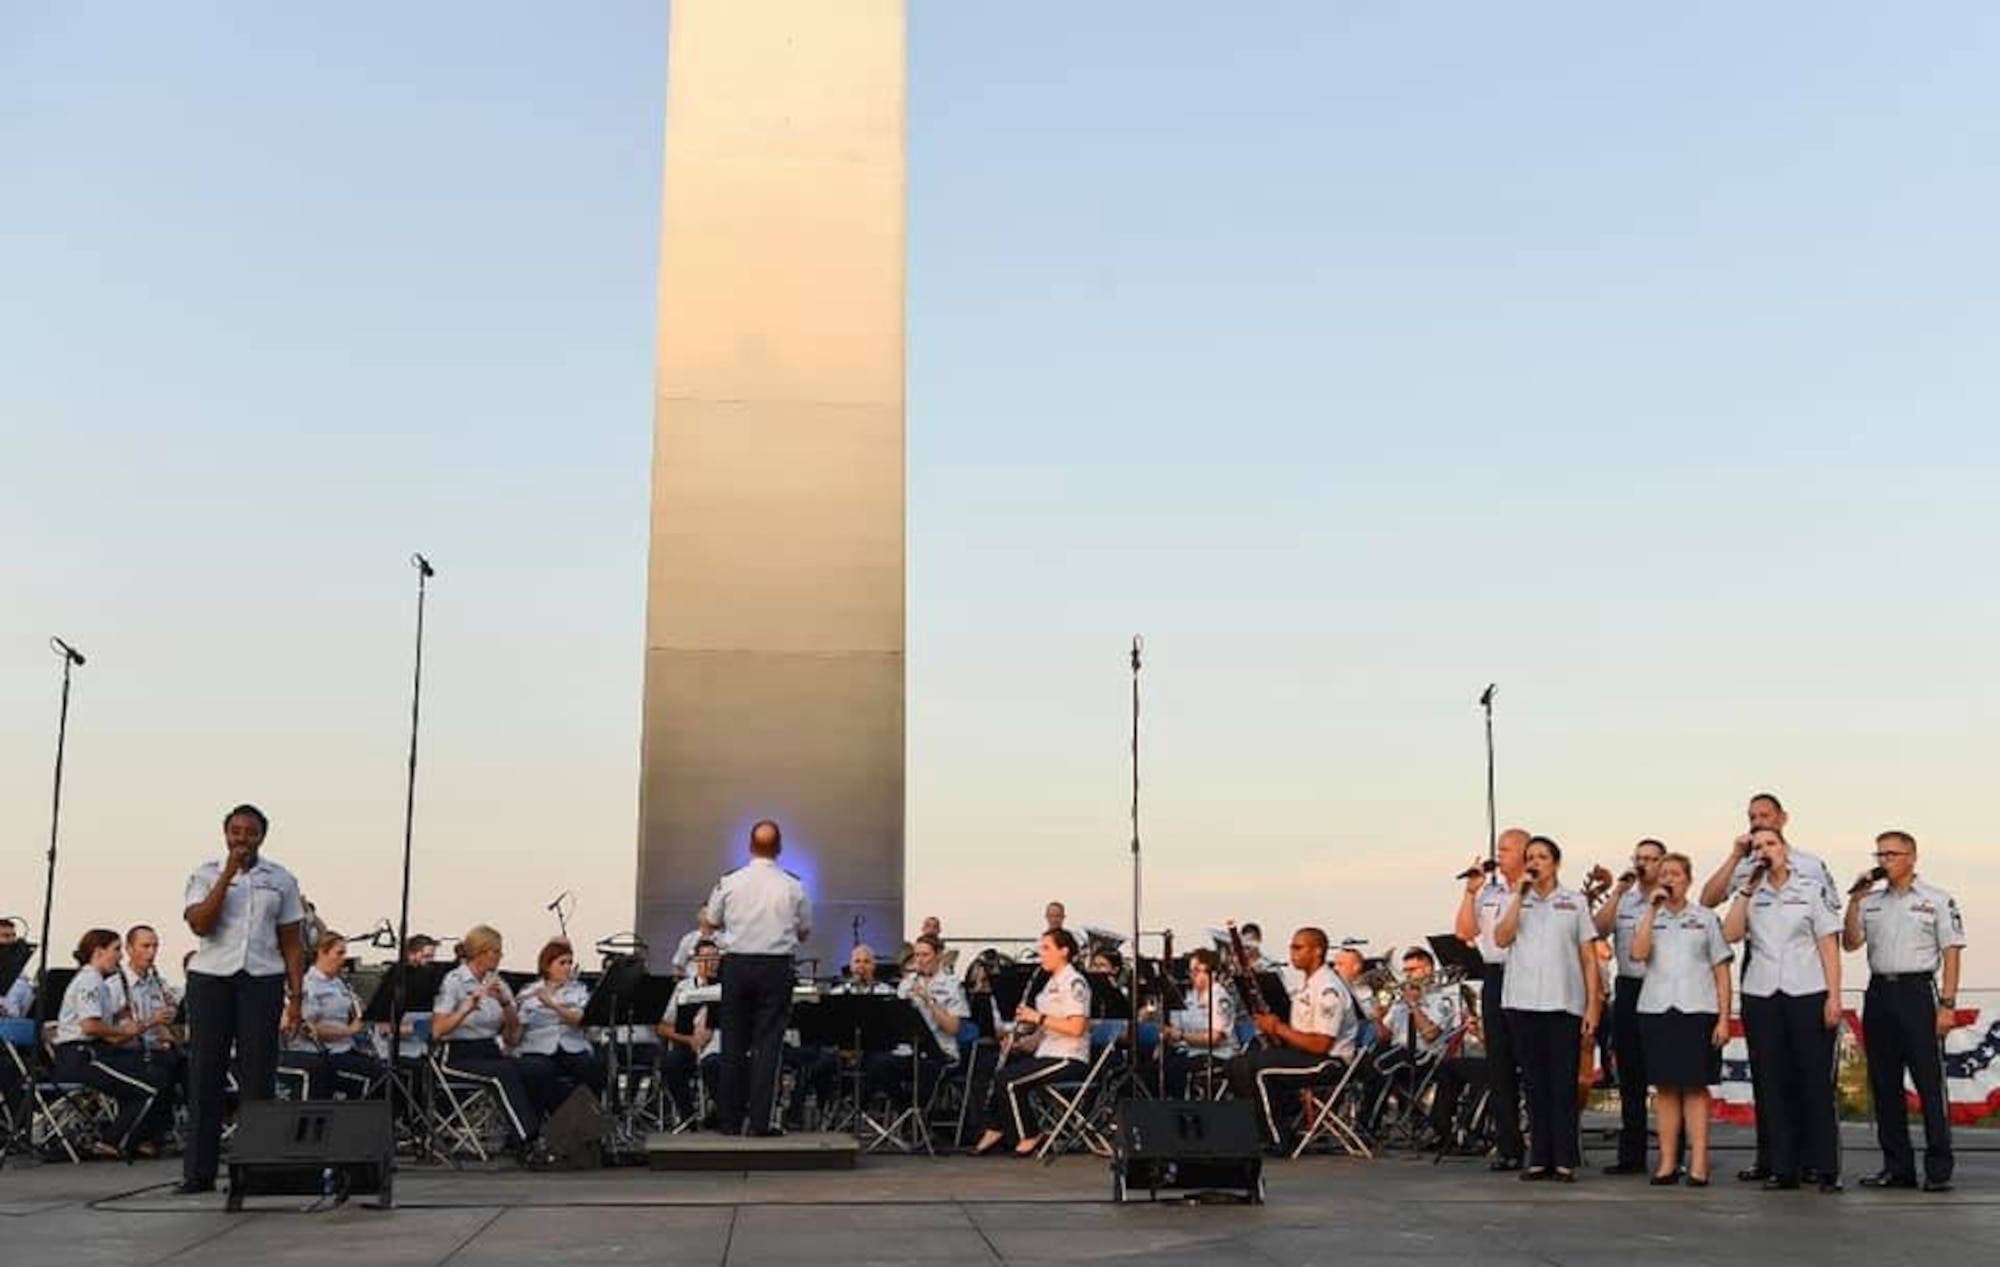 Presented by the U.S. Air Force Band, the Heritage to Horizons concert features impeccable demonstrations by the Air Force Honor Guard Drill Team as well as world-class music, featuring musicians from the Airmen of Note, Max Impact, Strolling Strings, Singing Sergeants, and the Ceremonial Brass Drum Line. The troupe performed July 26 at the Air Force Memorial.